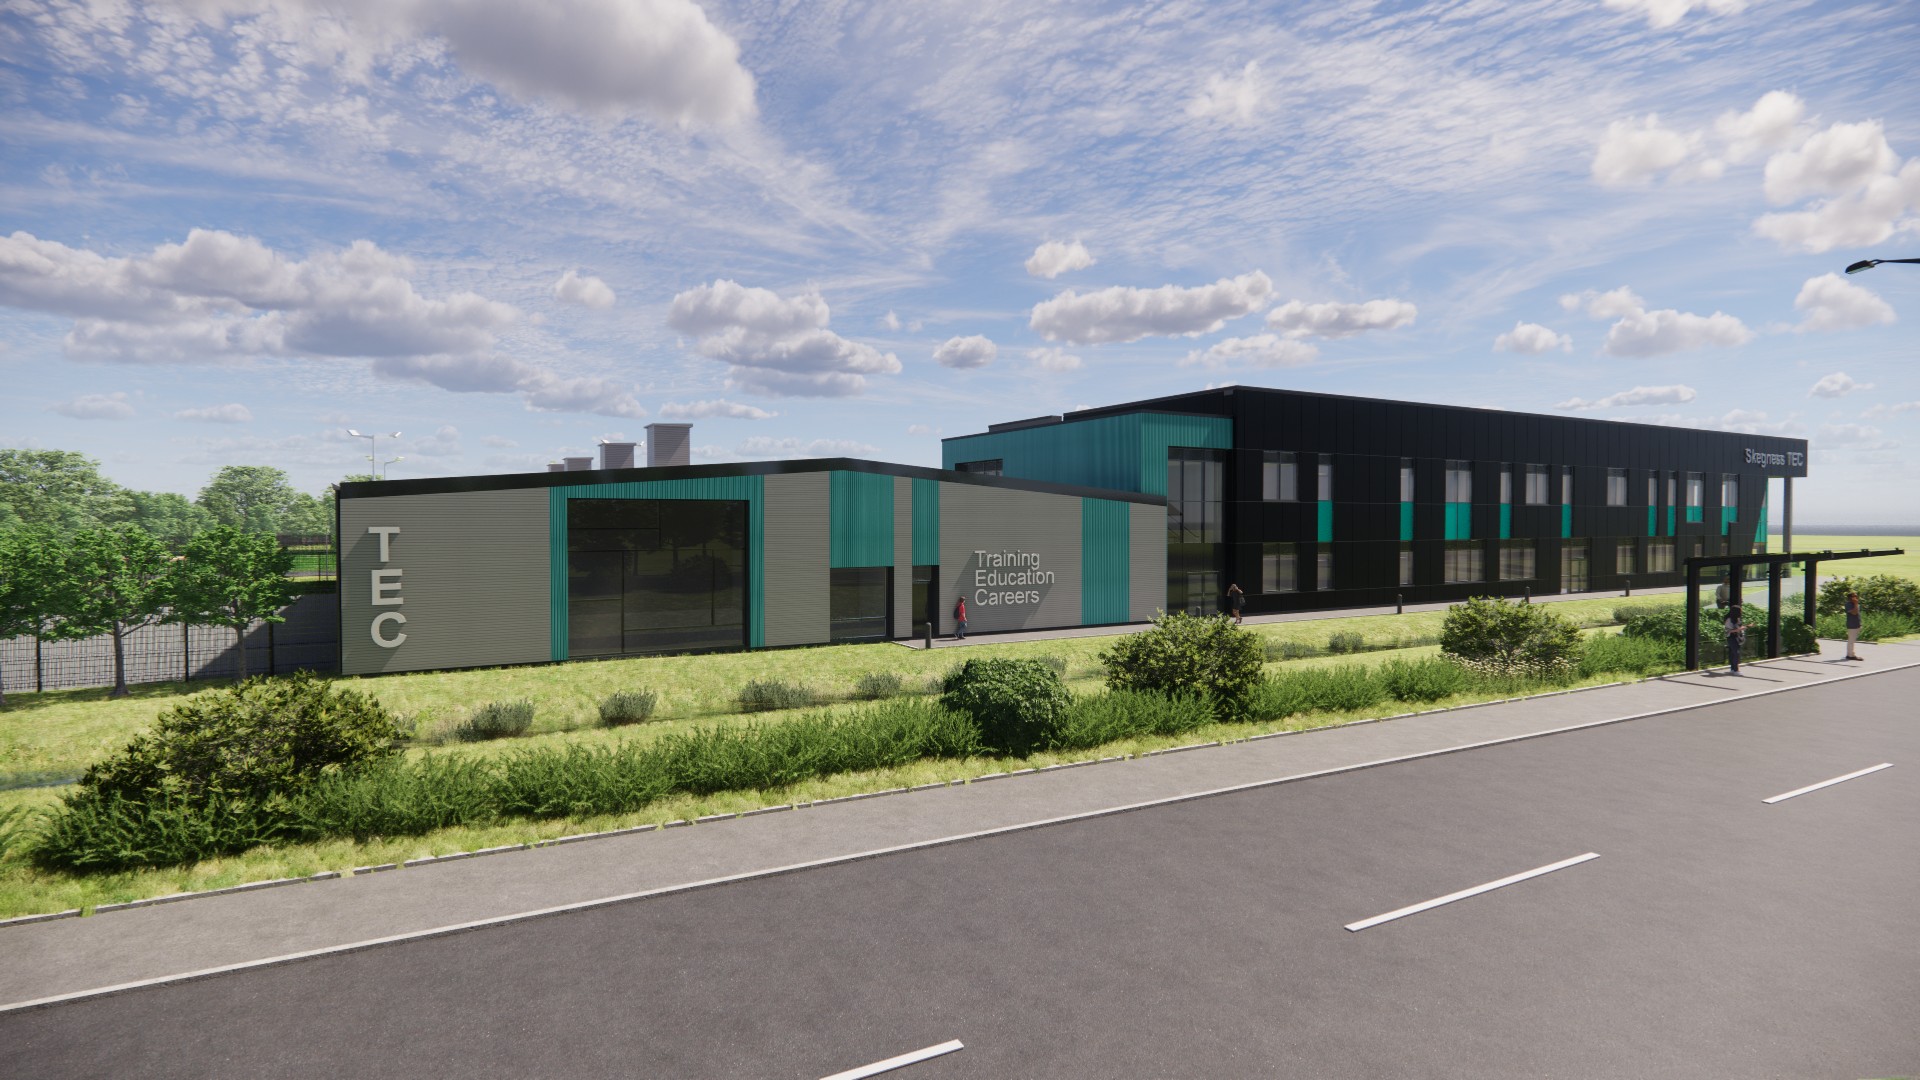 Construction is underway for a New Further and Higher Education Campus in Skegness.